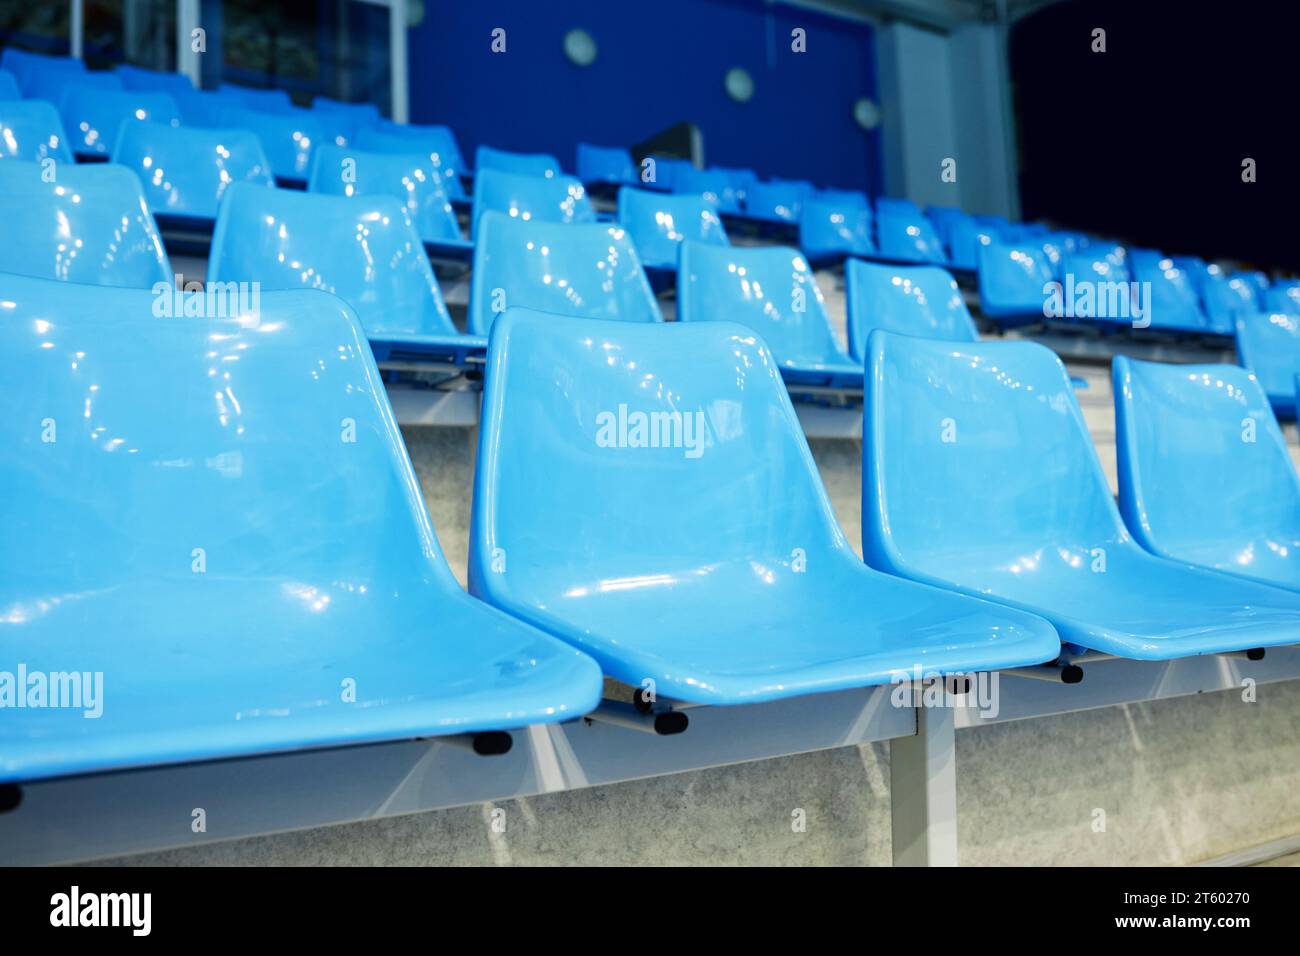 No people on blue plastic chairs of empty tribune at spacious modern stadium for fans of various sports matches, competitions and games Stock Photo